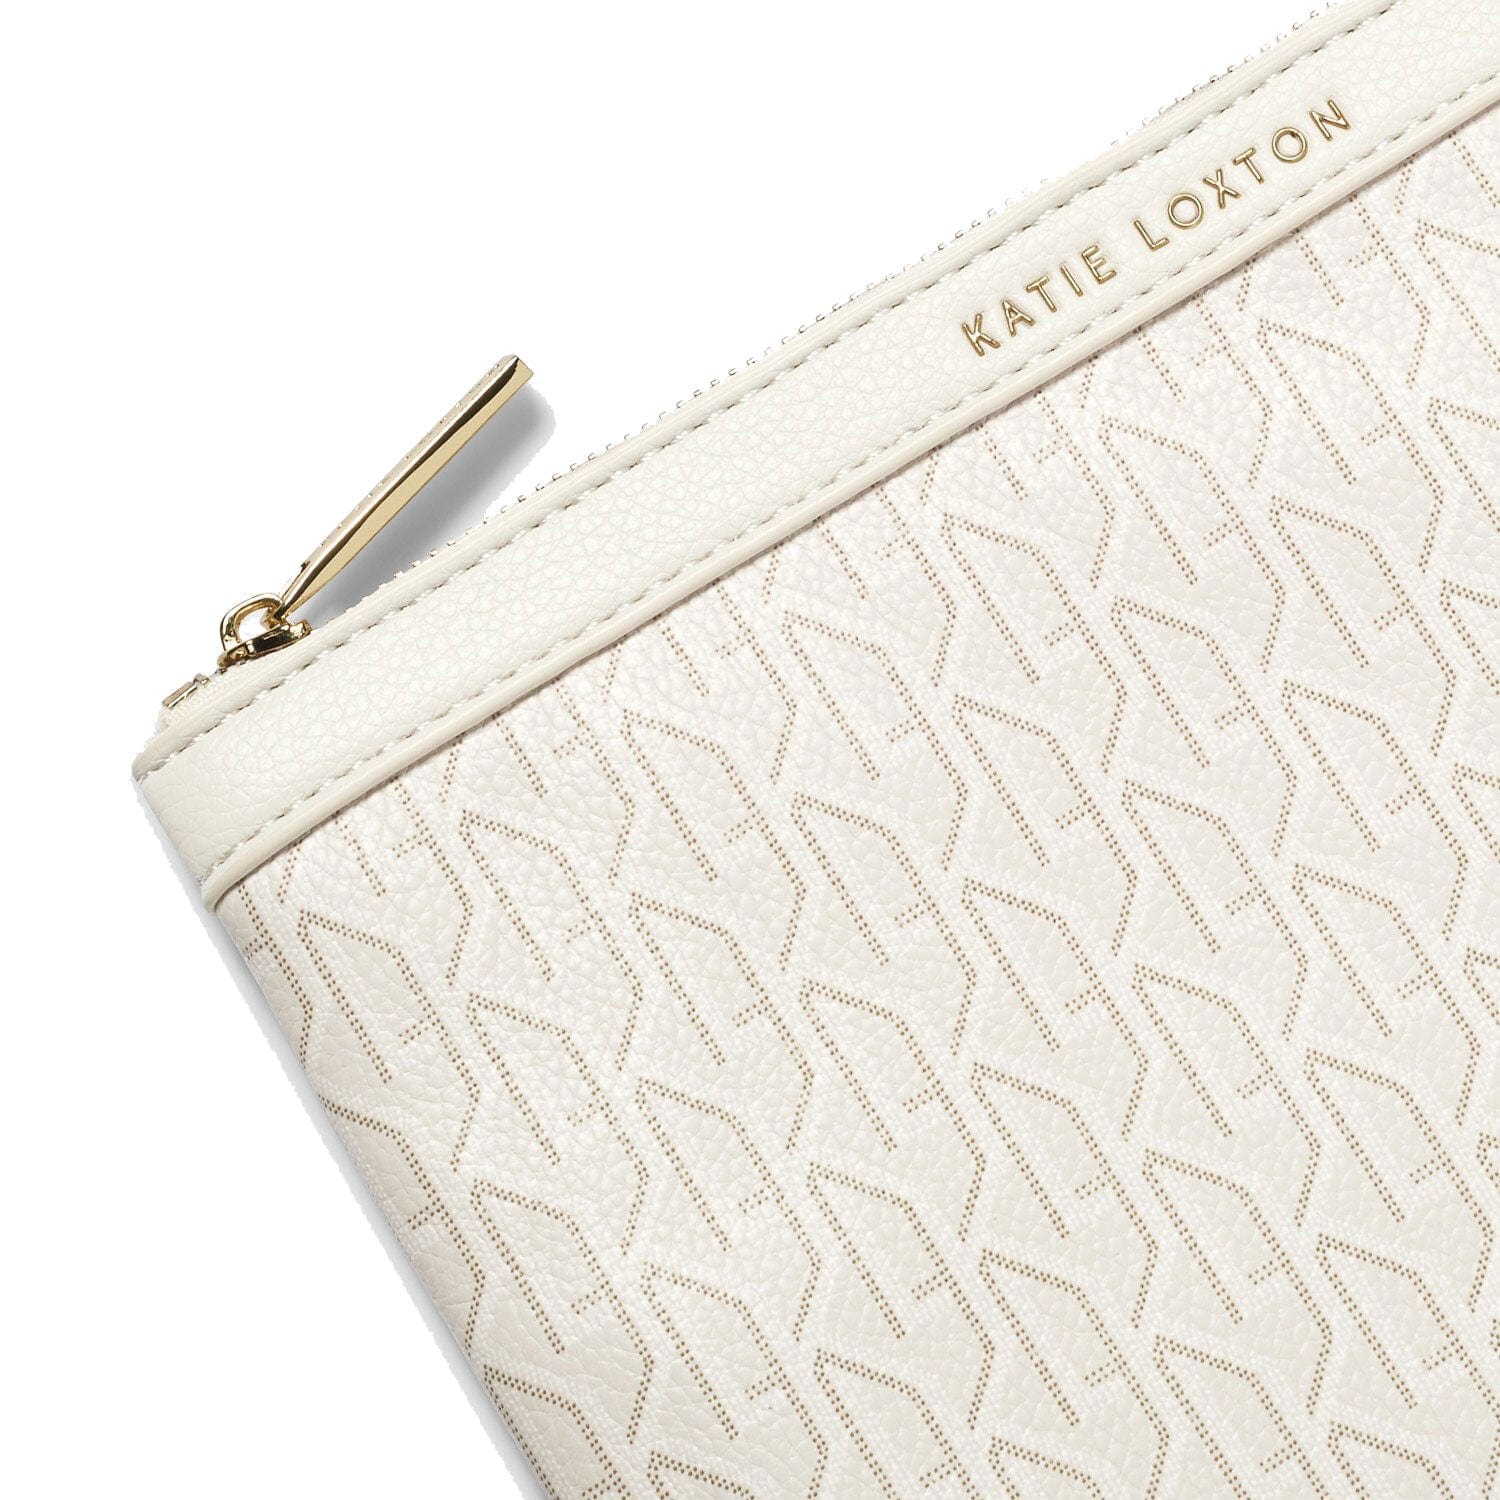 Katie Loxton Pouch Katie Loxton Signature Pouch - Black / Taupe / Off White / Emerald Green / Chocolate